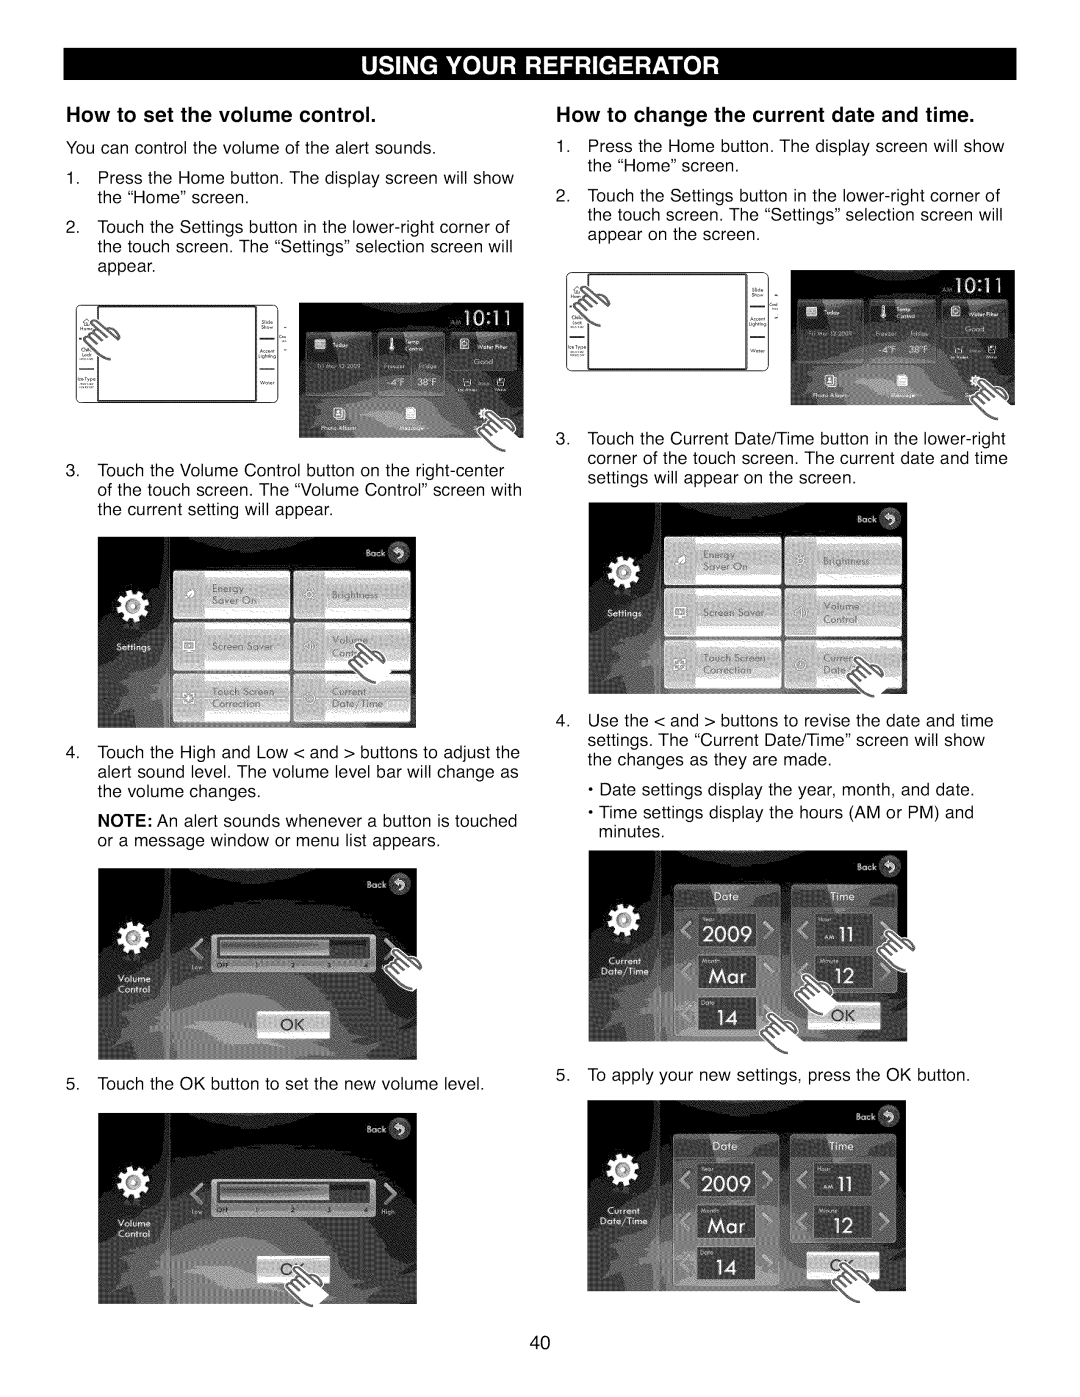 Kenmore 41002, 41003, 41009 manual How to set the volume control, How to change the current date and time 